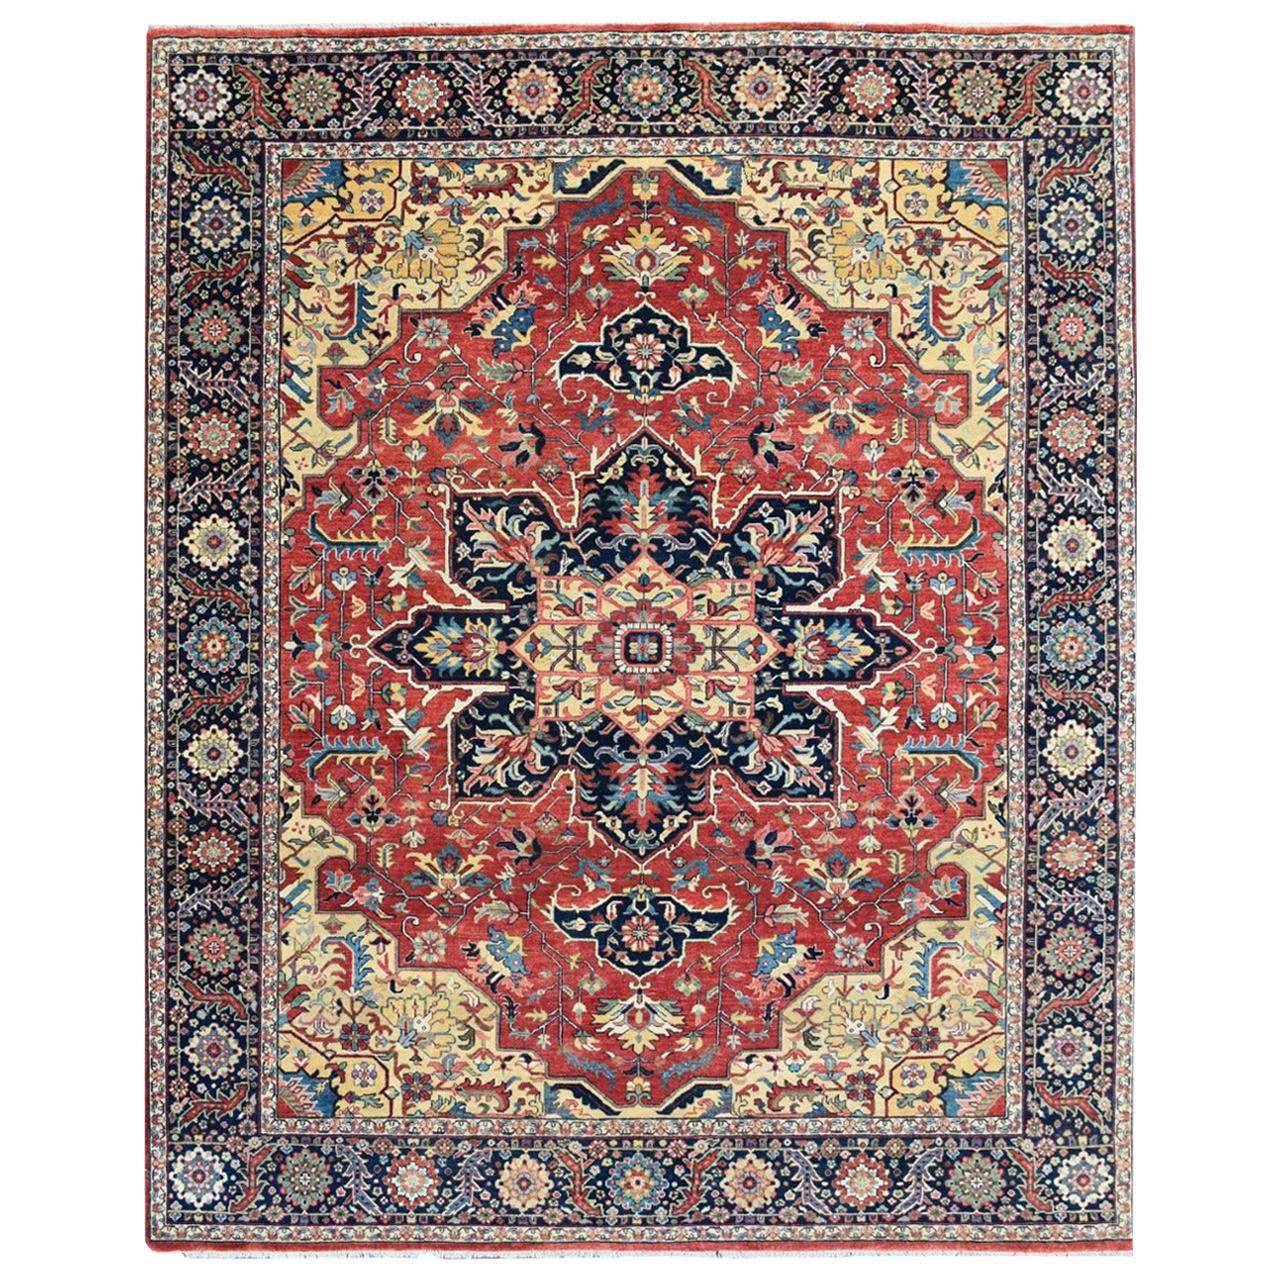 Wonderful New Indian traditional Rug